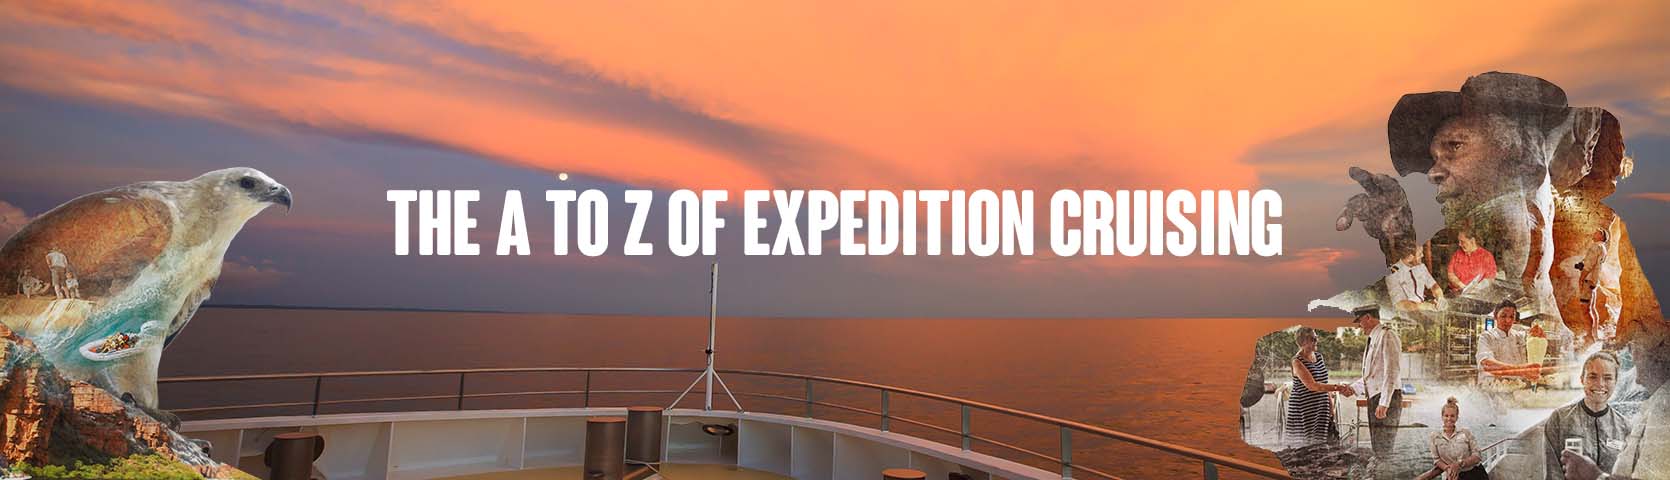 THE A TO Z OF EXPEDITION CRUISING